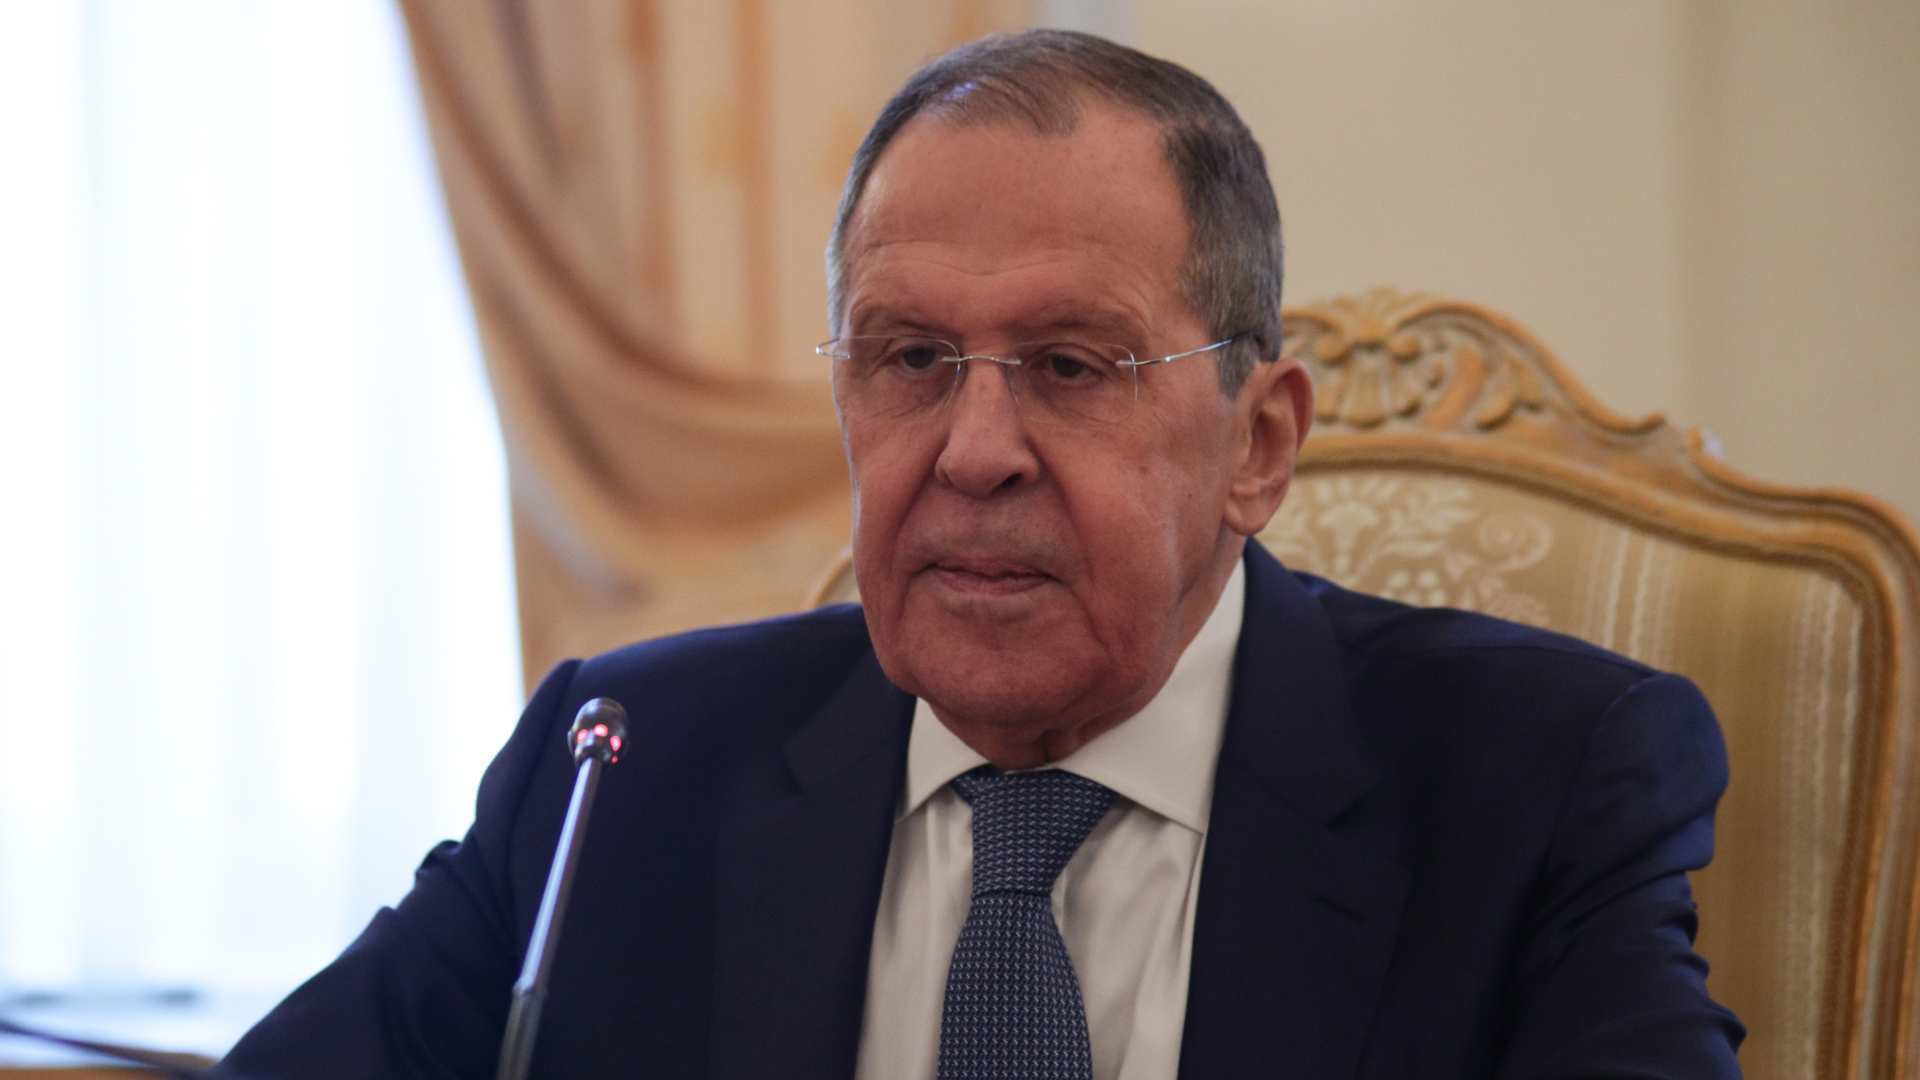 Sergey Lavrov: The Russian approaches to Gaza and Ukraine | Politics #Sergey #Lavrov #Russian #approaches #Gaza #Ukraine #Politics